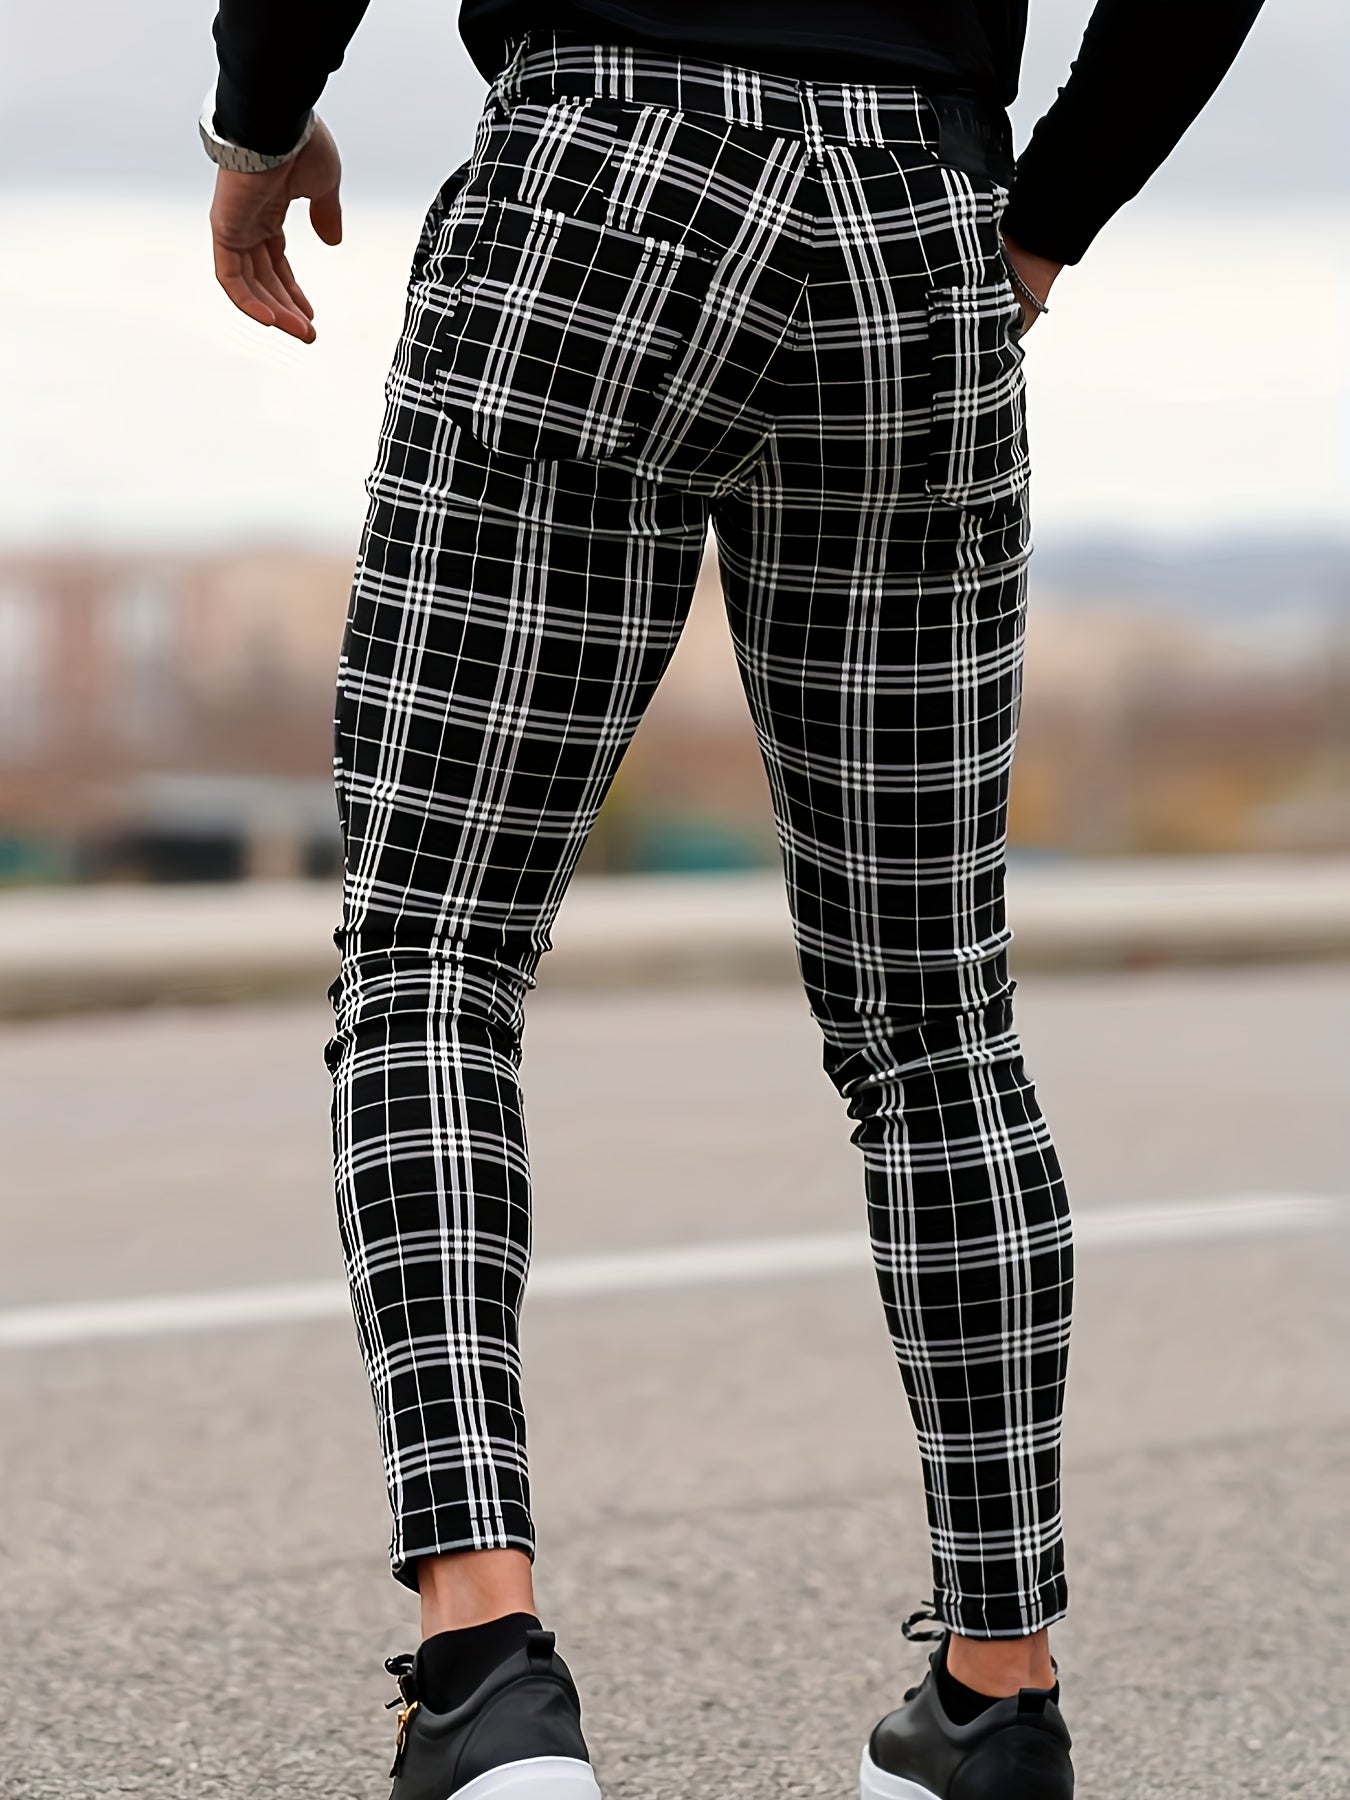 Men's Classic Plaid Casual Tapered Trousers Casual Long Cropped Pants Streetwear For Men